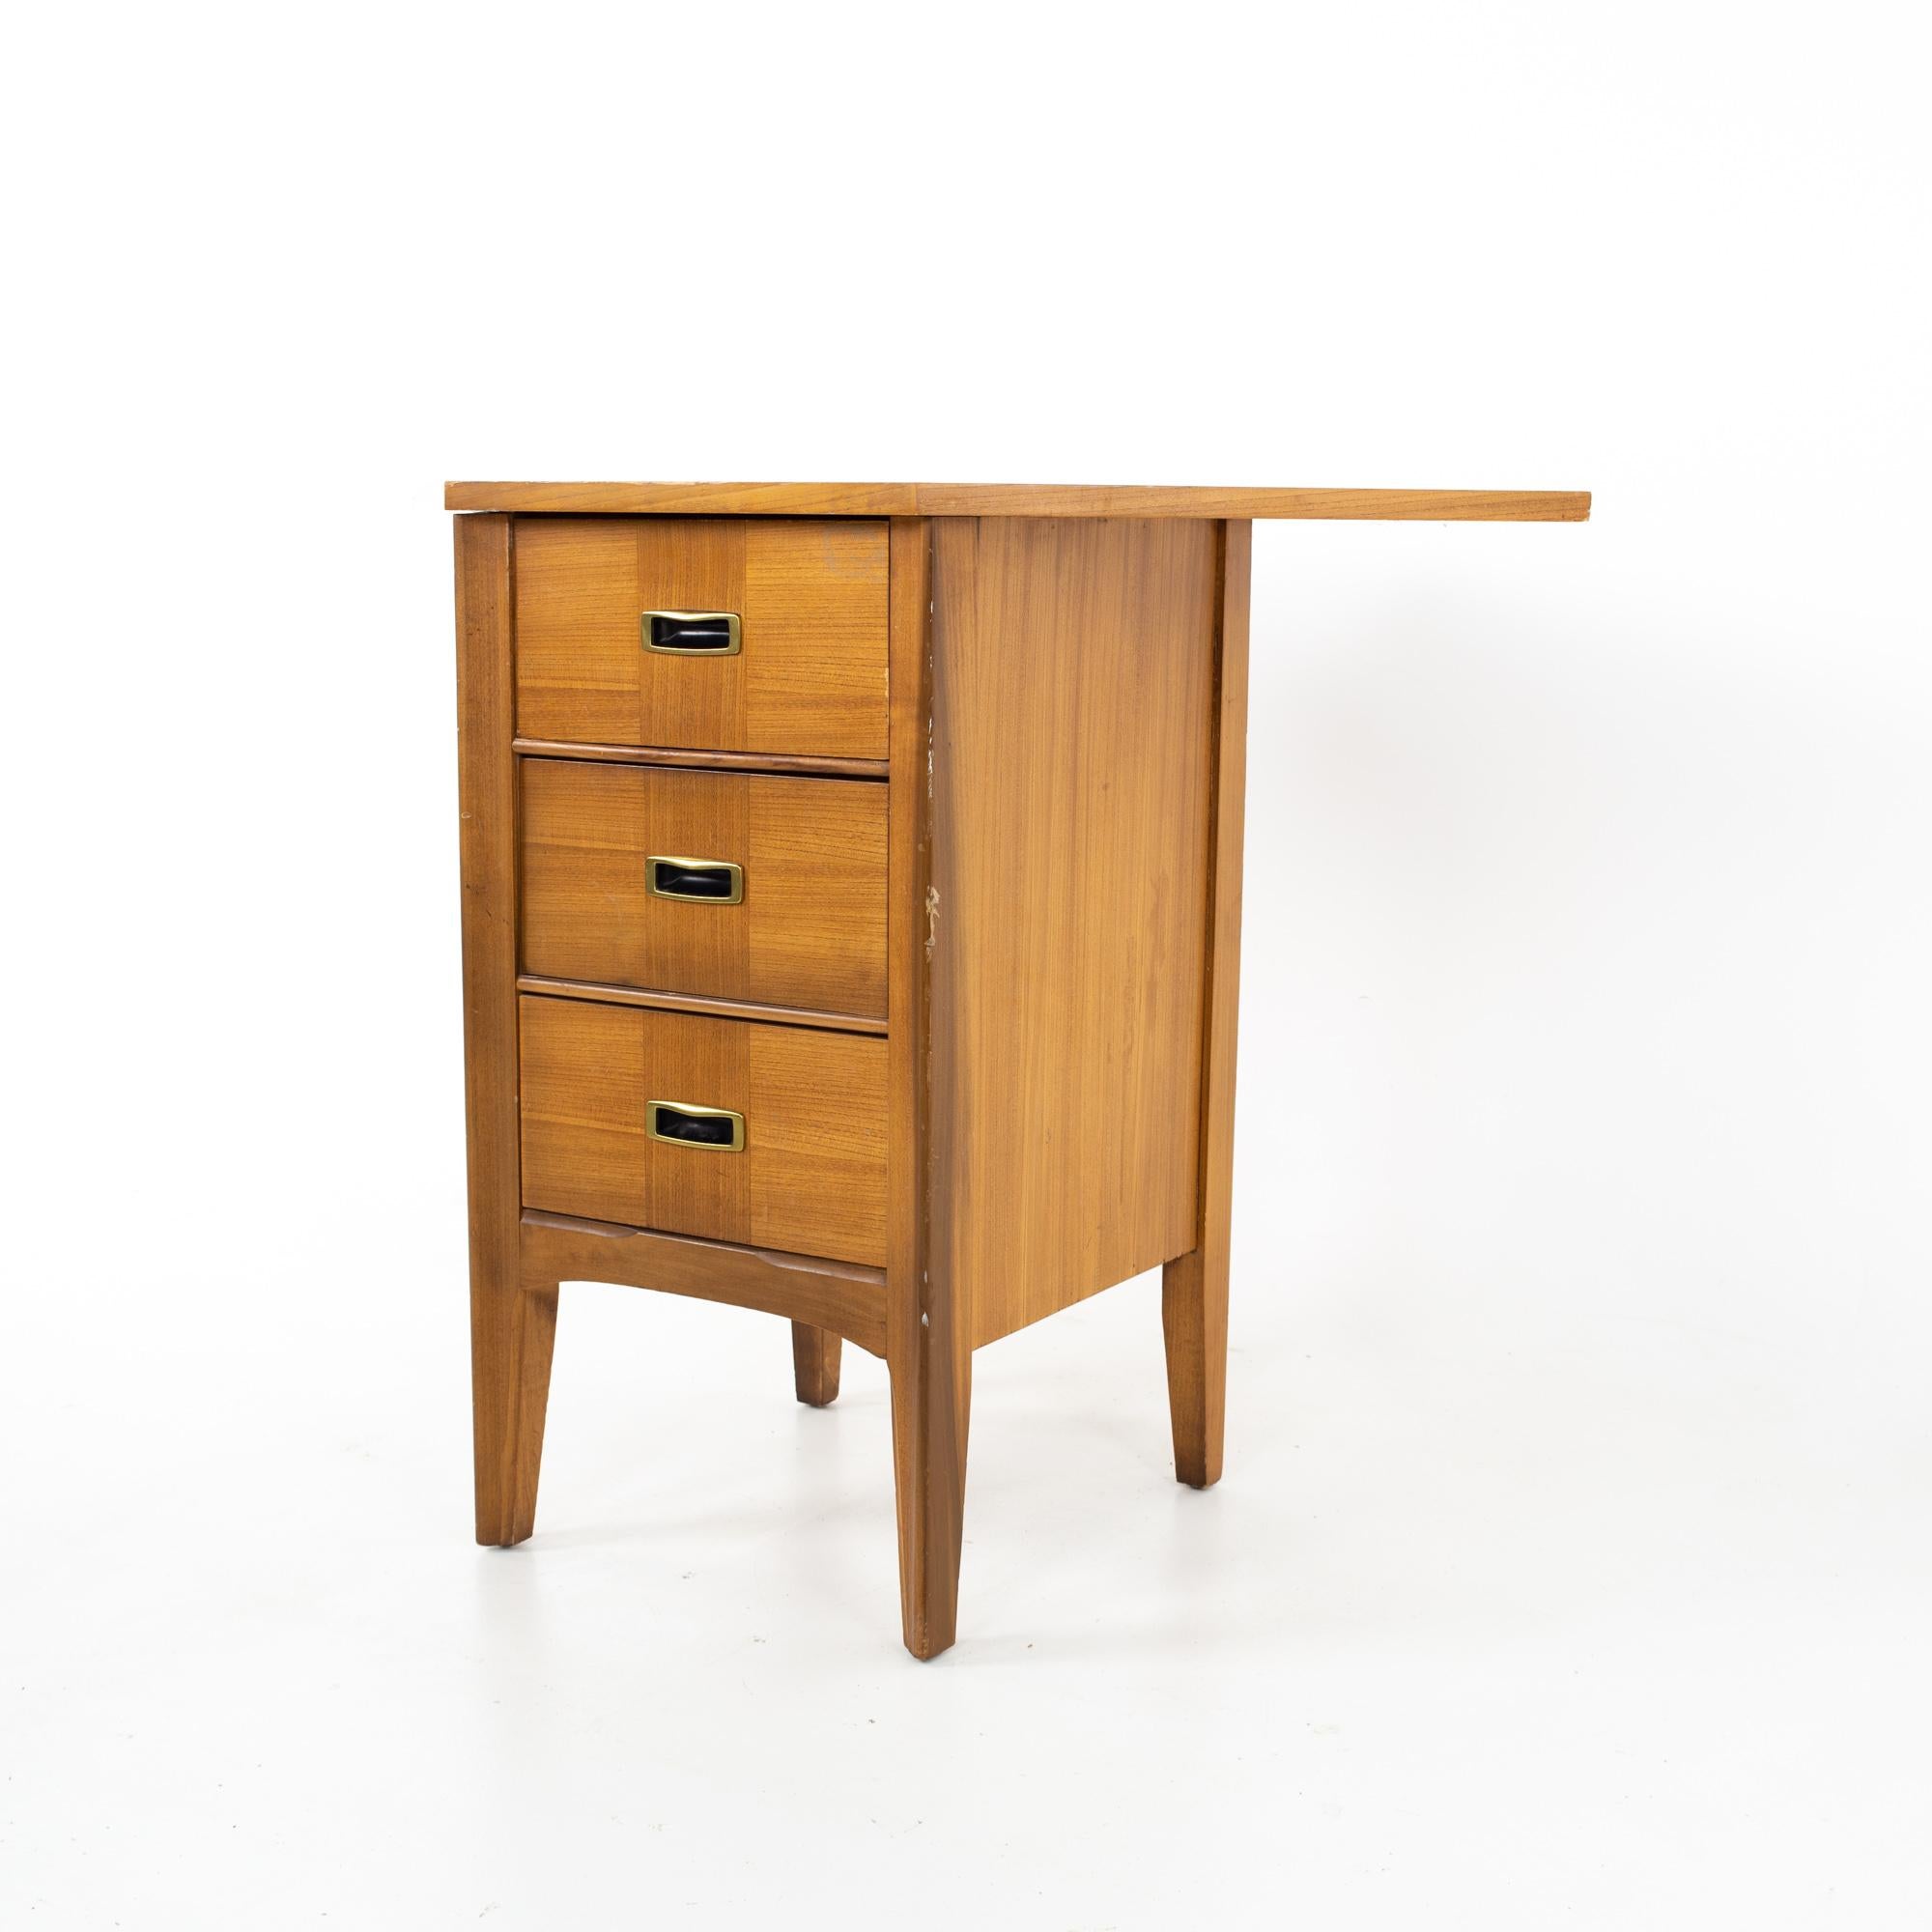 Mid century walnut and brass 3 drawer corner chest table
Corner table measures: 41.5 wide x 33.5 deep x 31.25 inches high

All pieces of furniture can be had in what we call restored vintage condition. That means the piece is restored upon